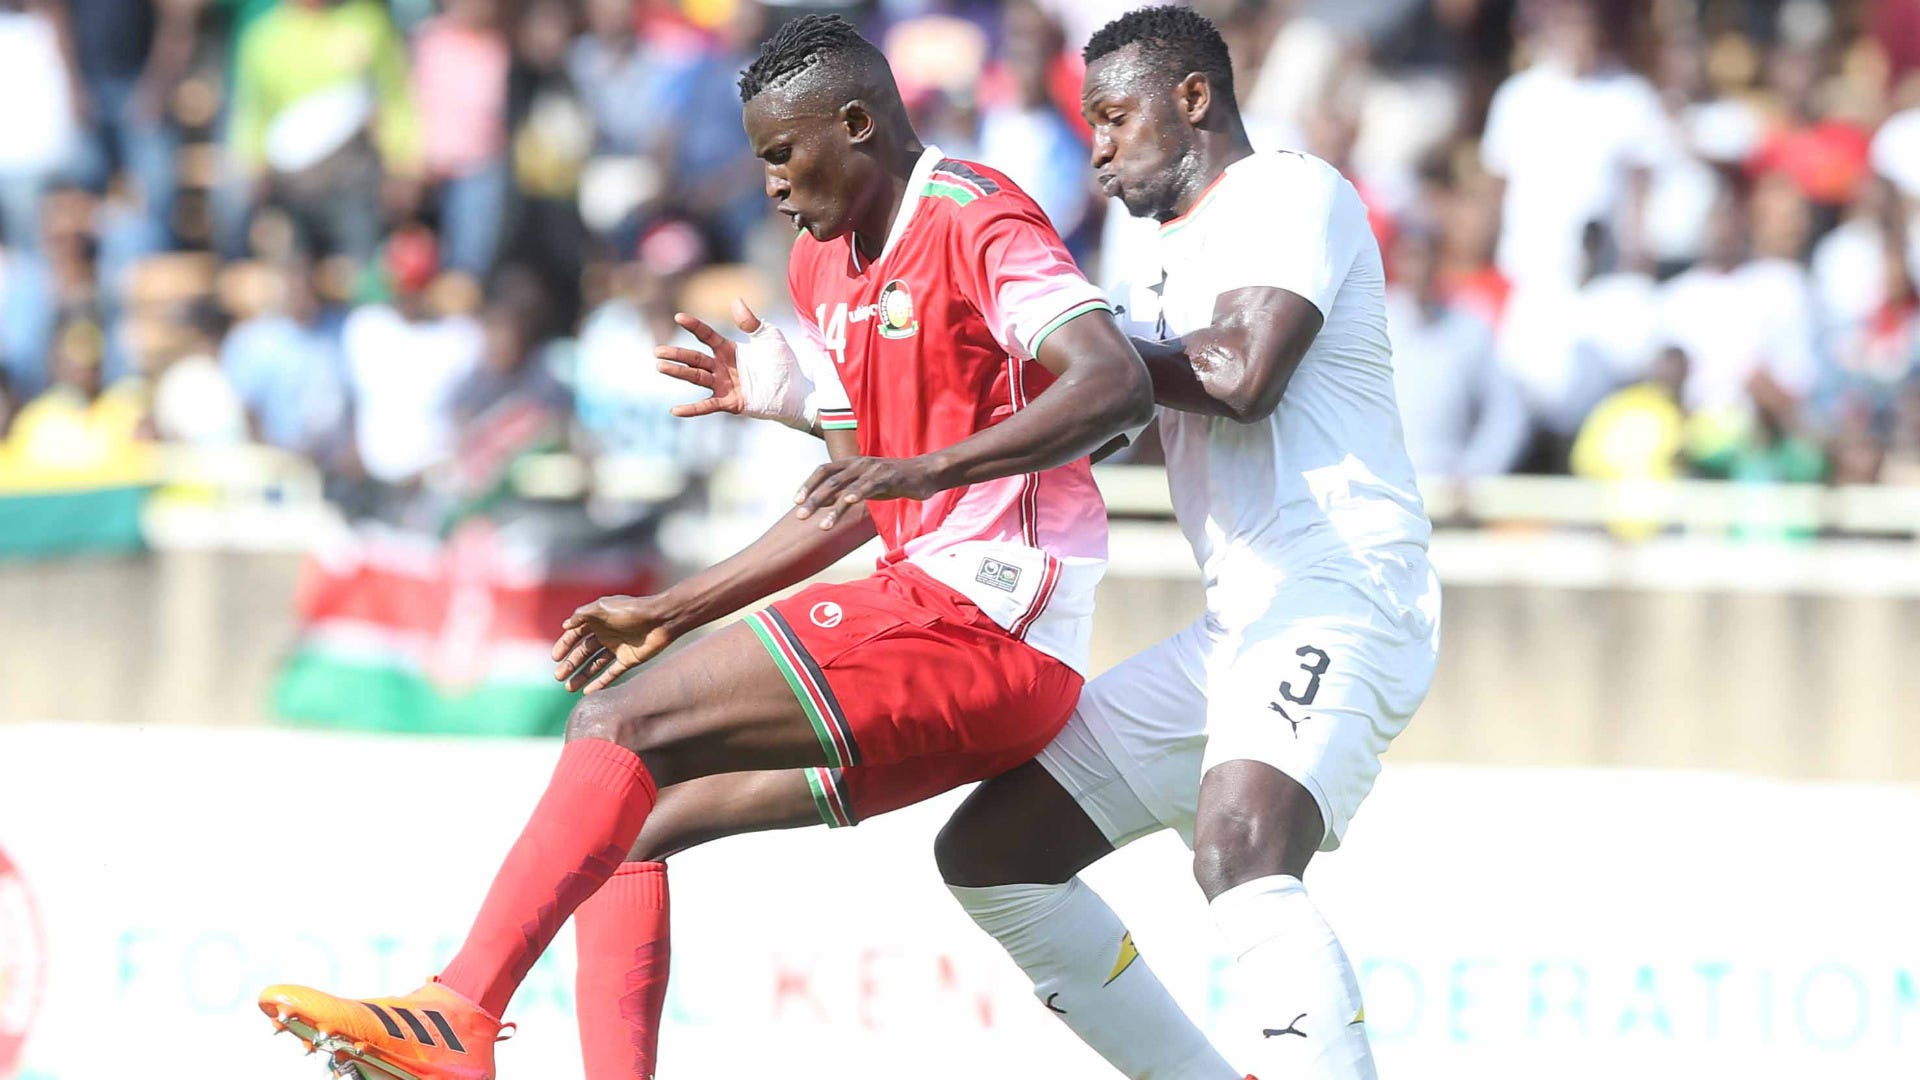 Rashid Echesa on Twitter: Our National football Team @HarambeeStars_ have  qualified for the #AFCON2019 .This championship has eluded us for the past  15 years ,I thank our boys for putting up a